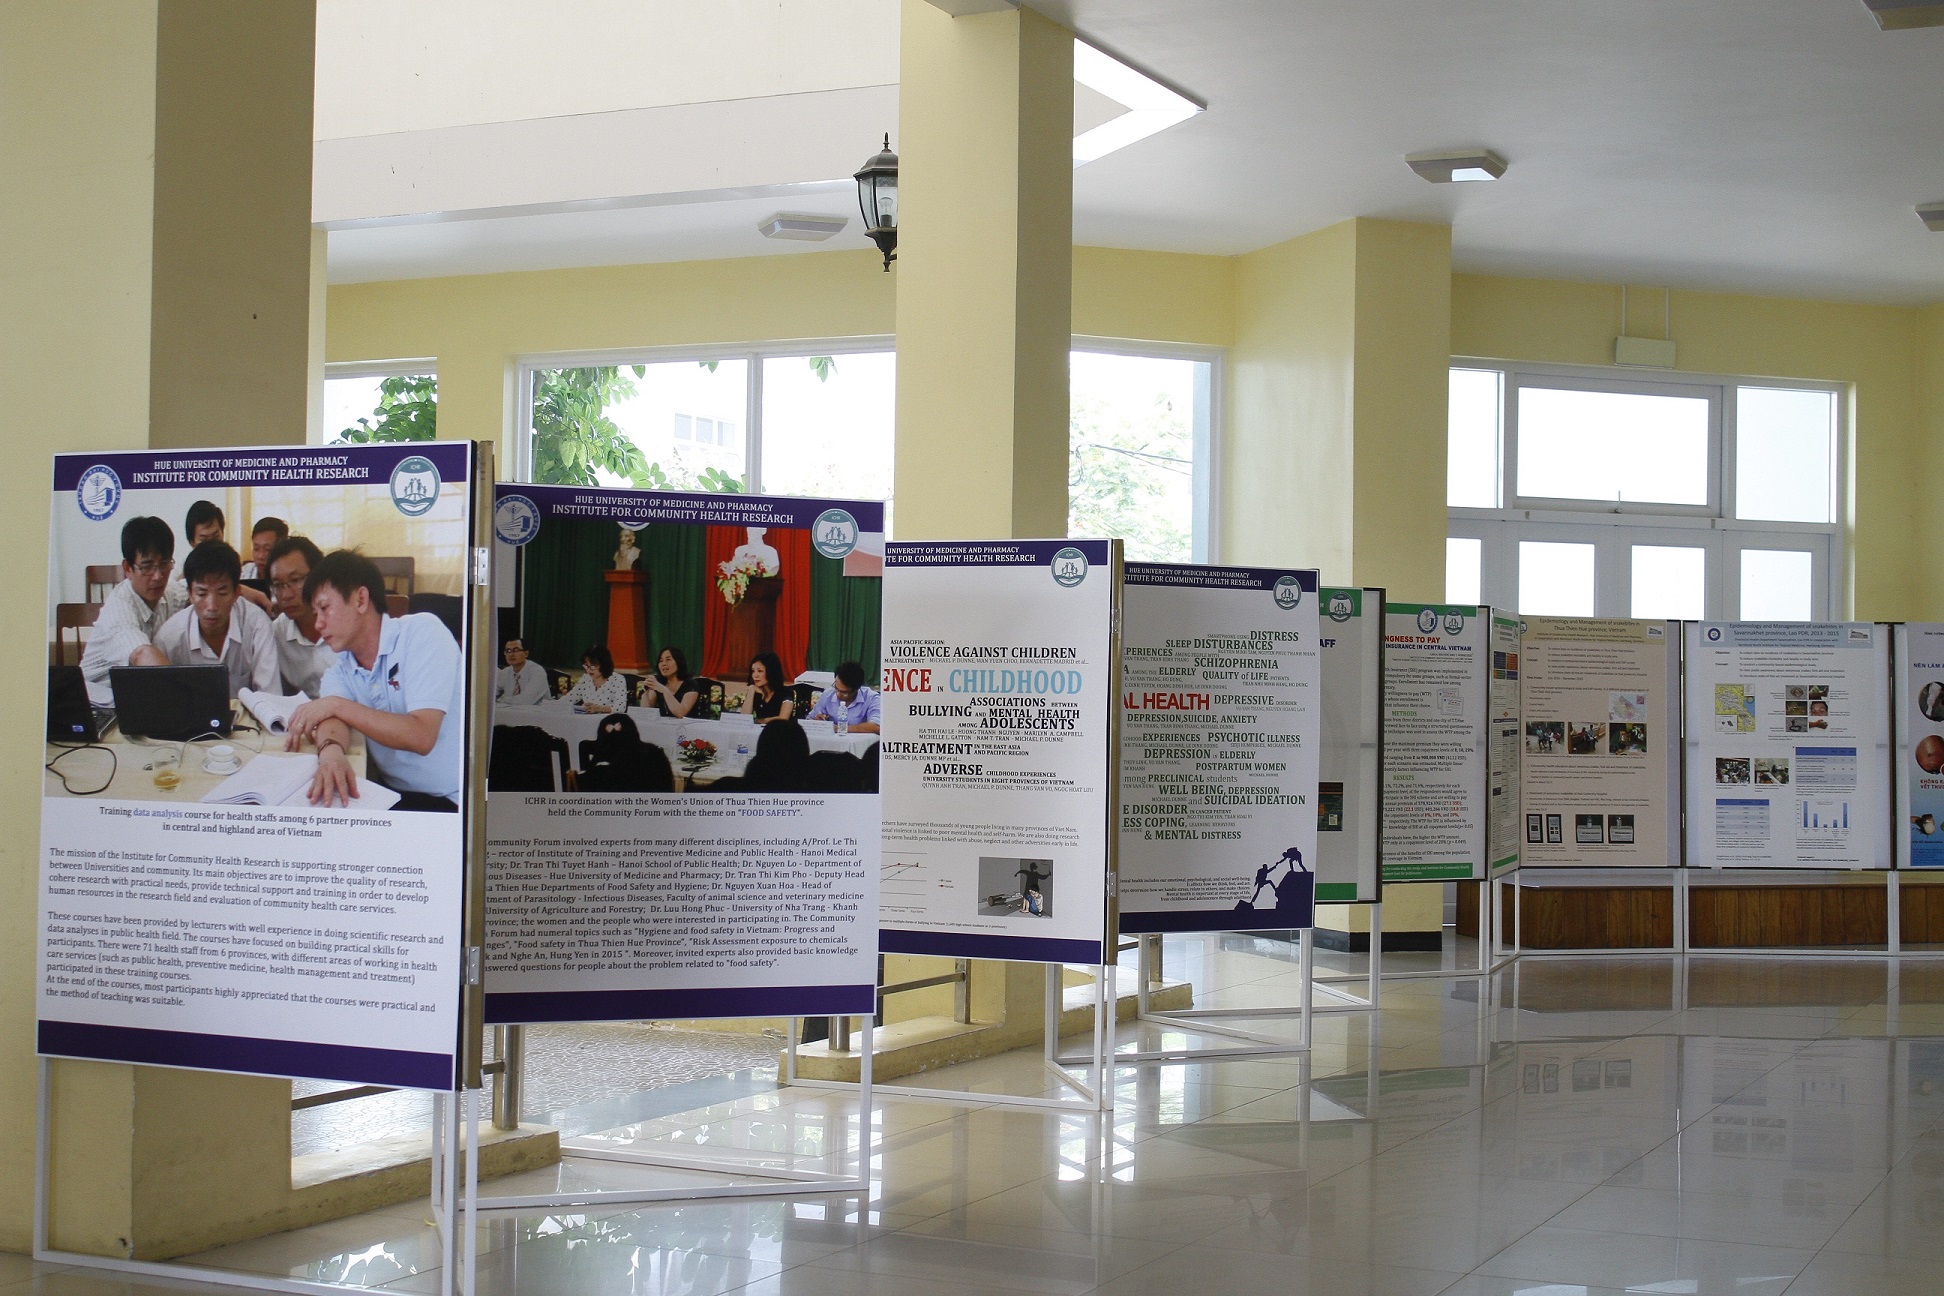 The 9th International Conference on Public Health in Yangon, Myanmar